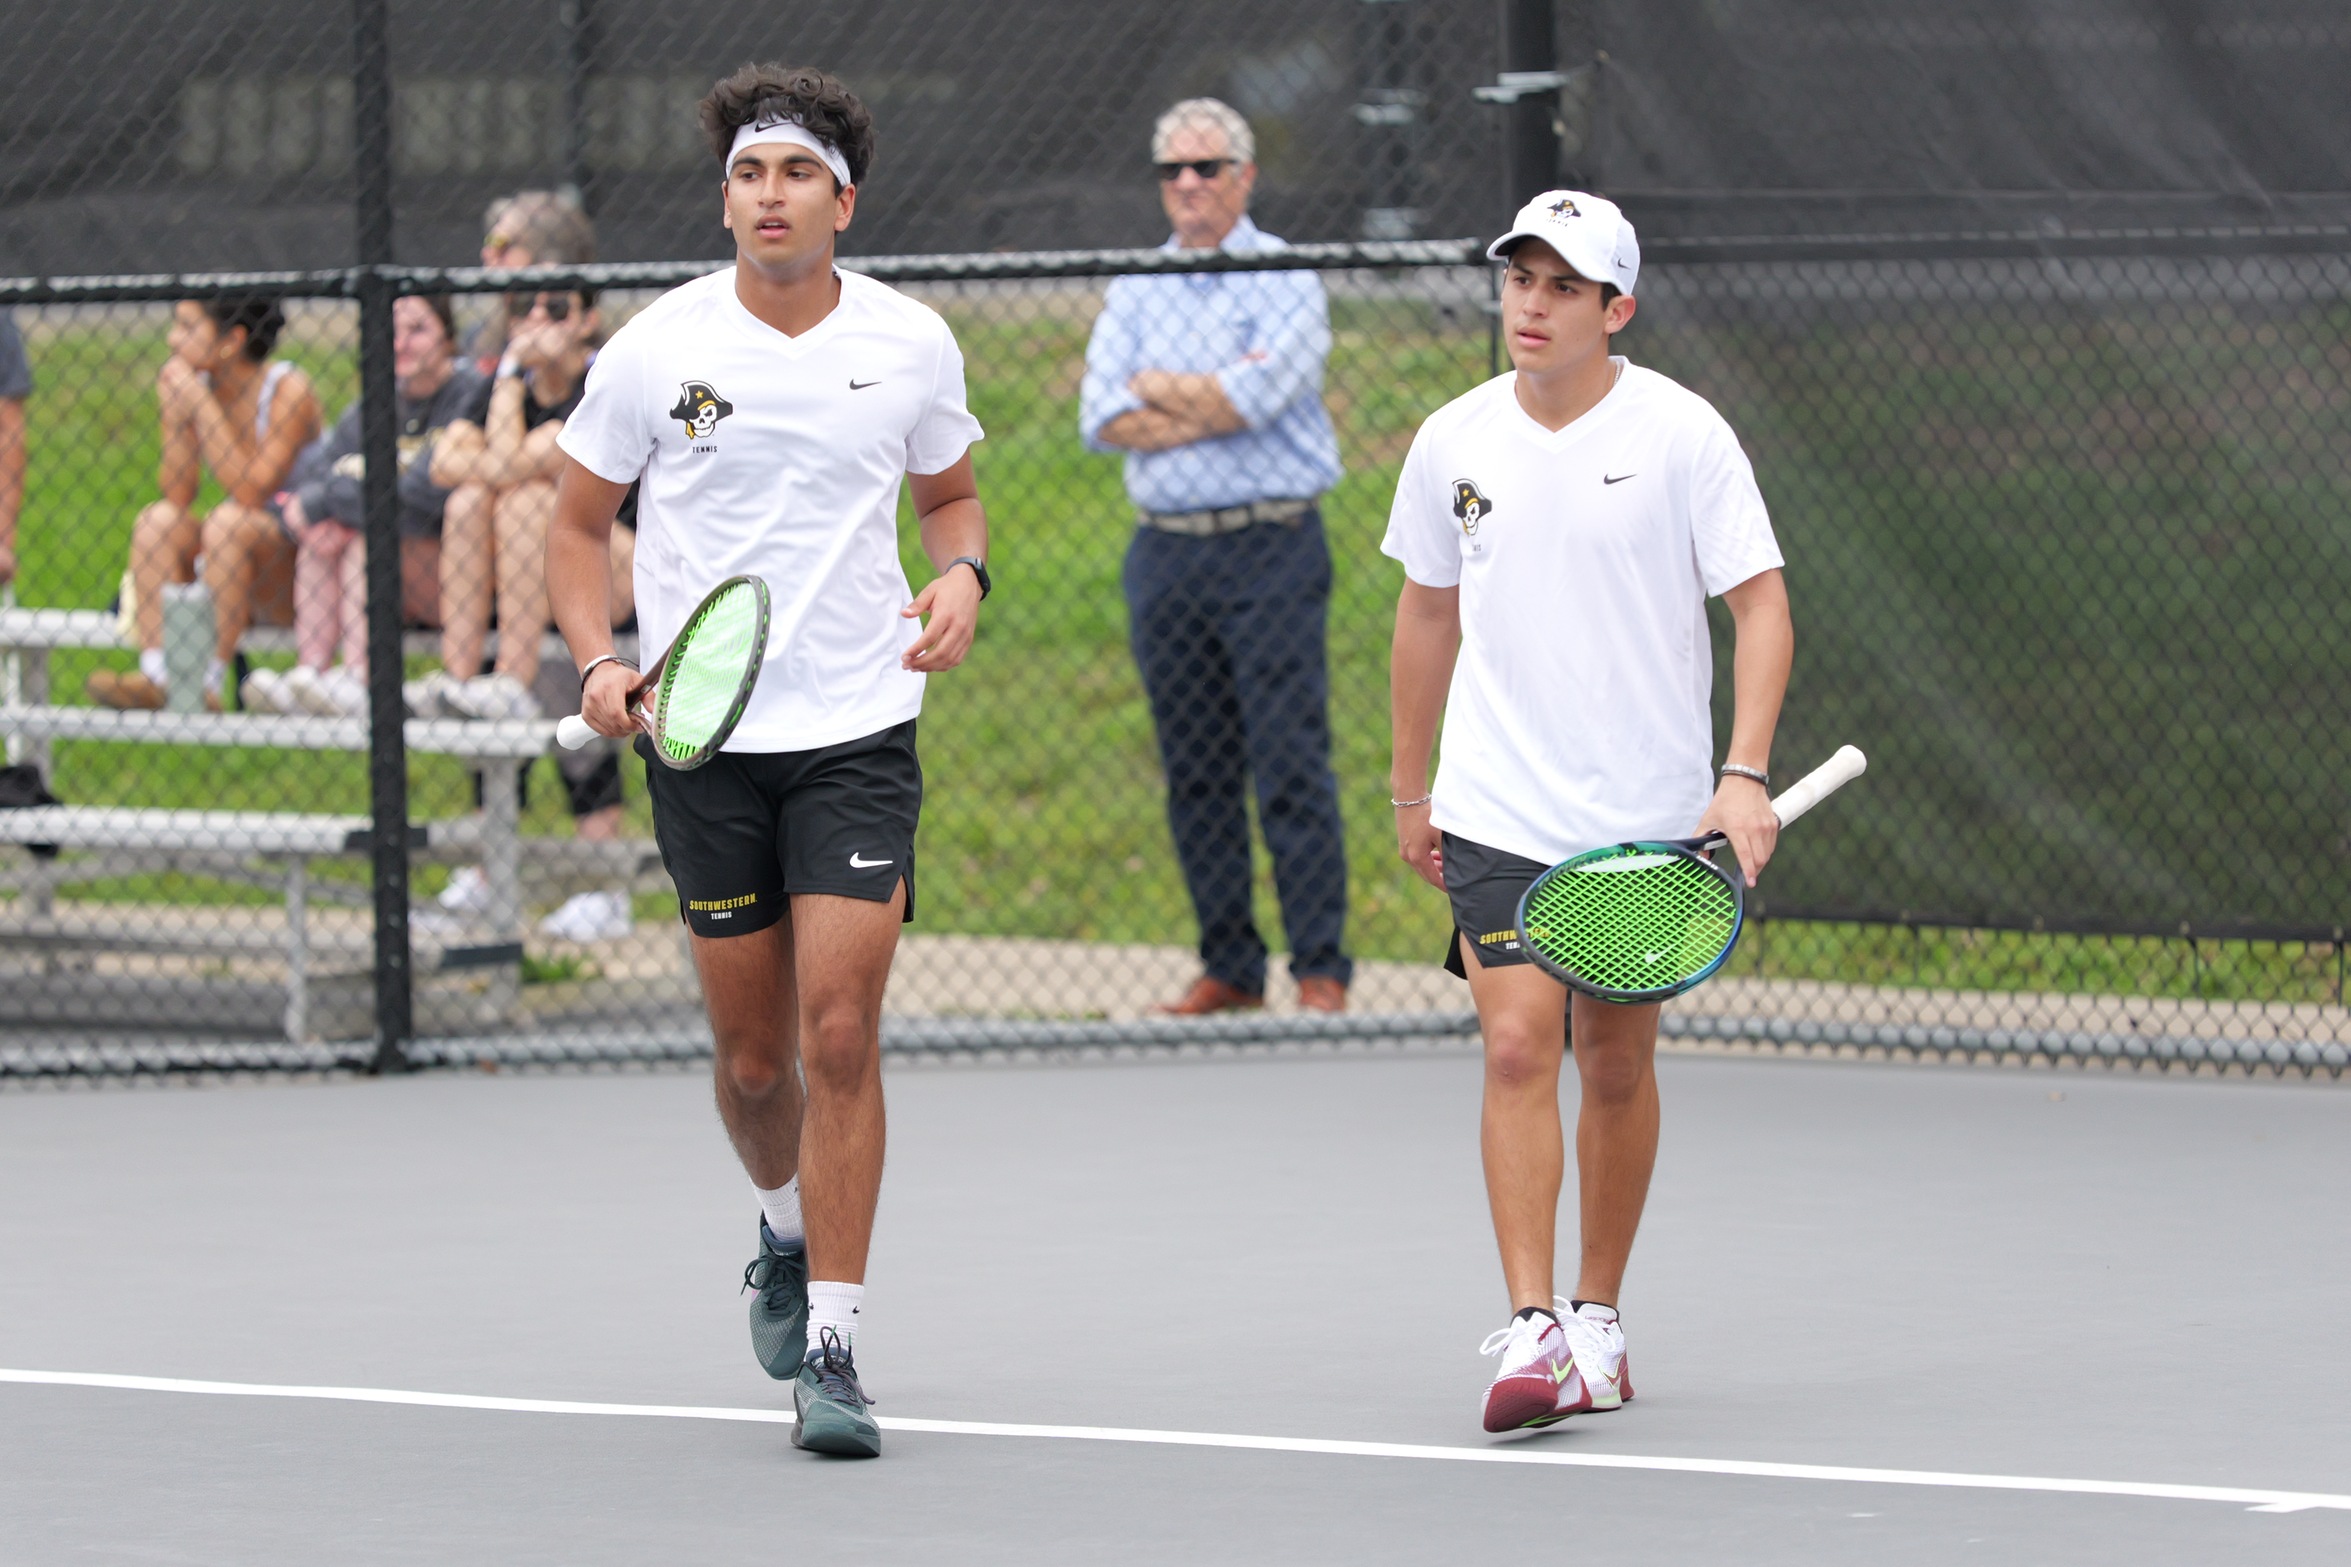 Clemente And Patel Named SCAC Doubles Team Of The Week